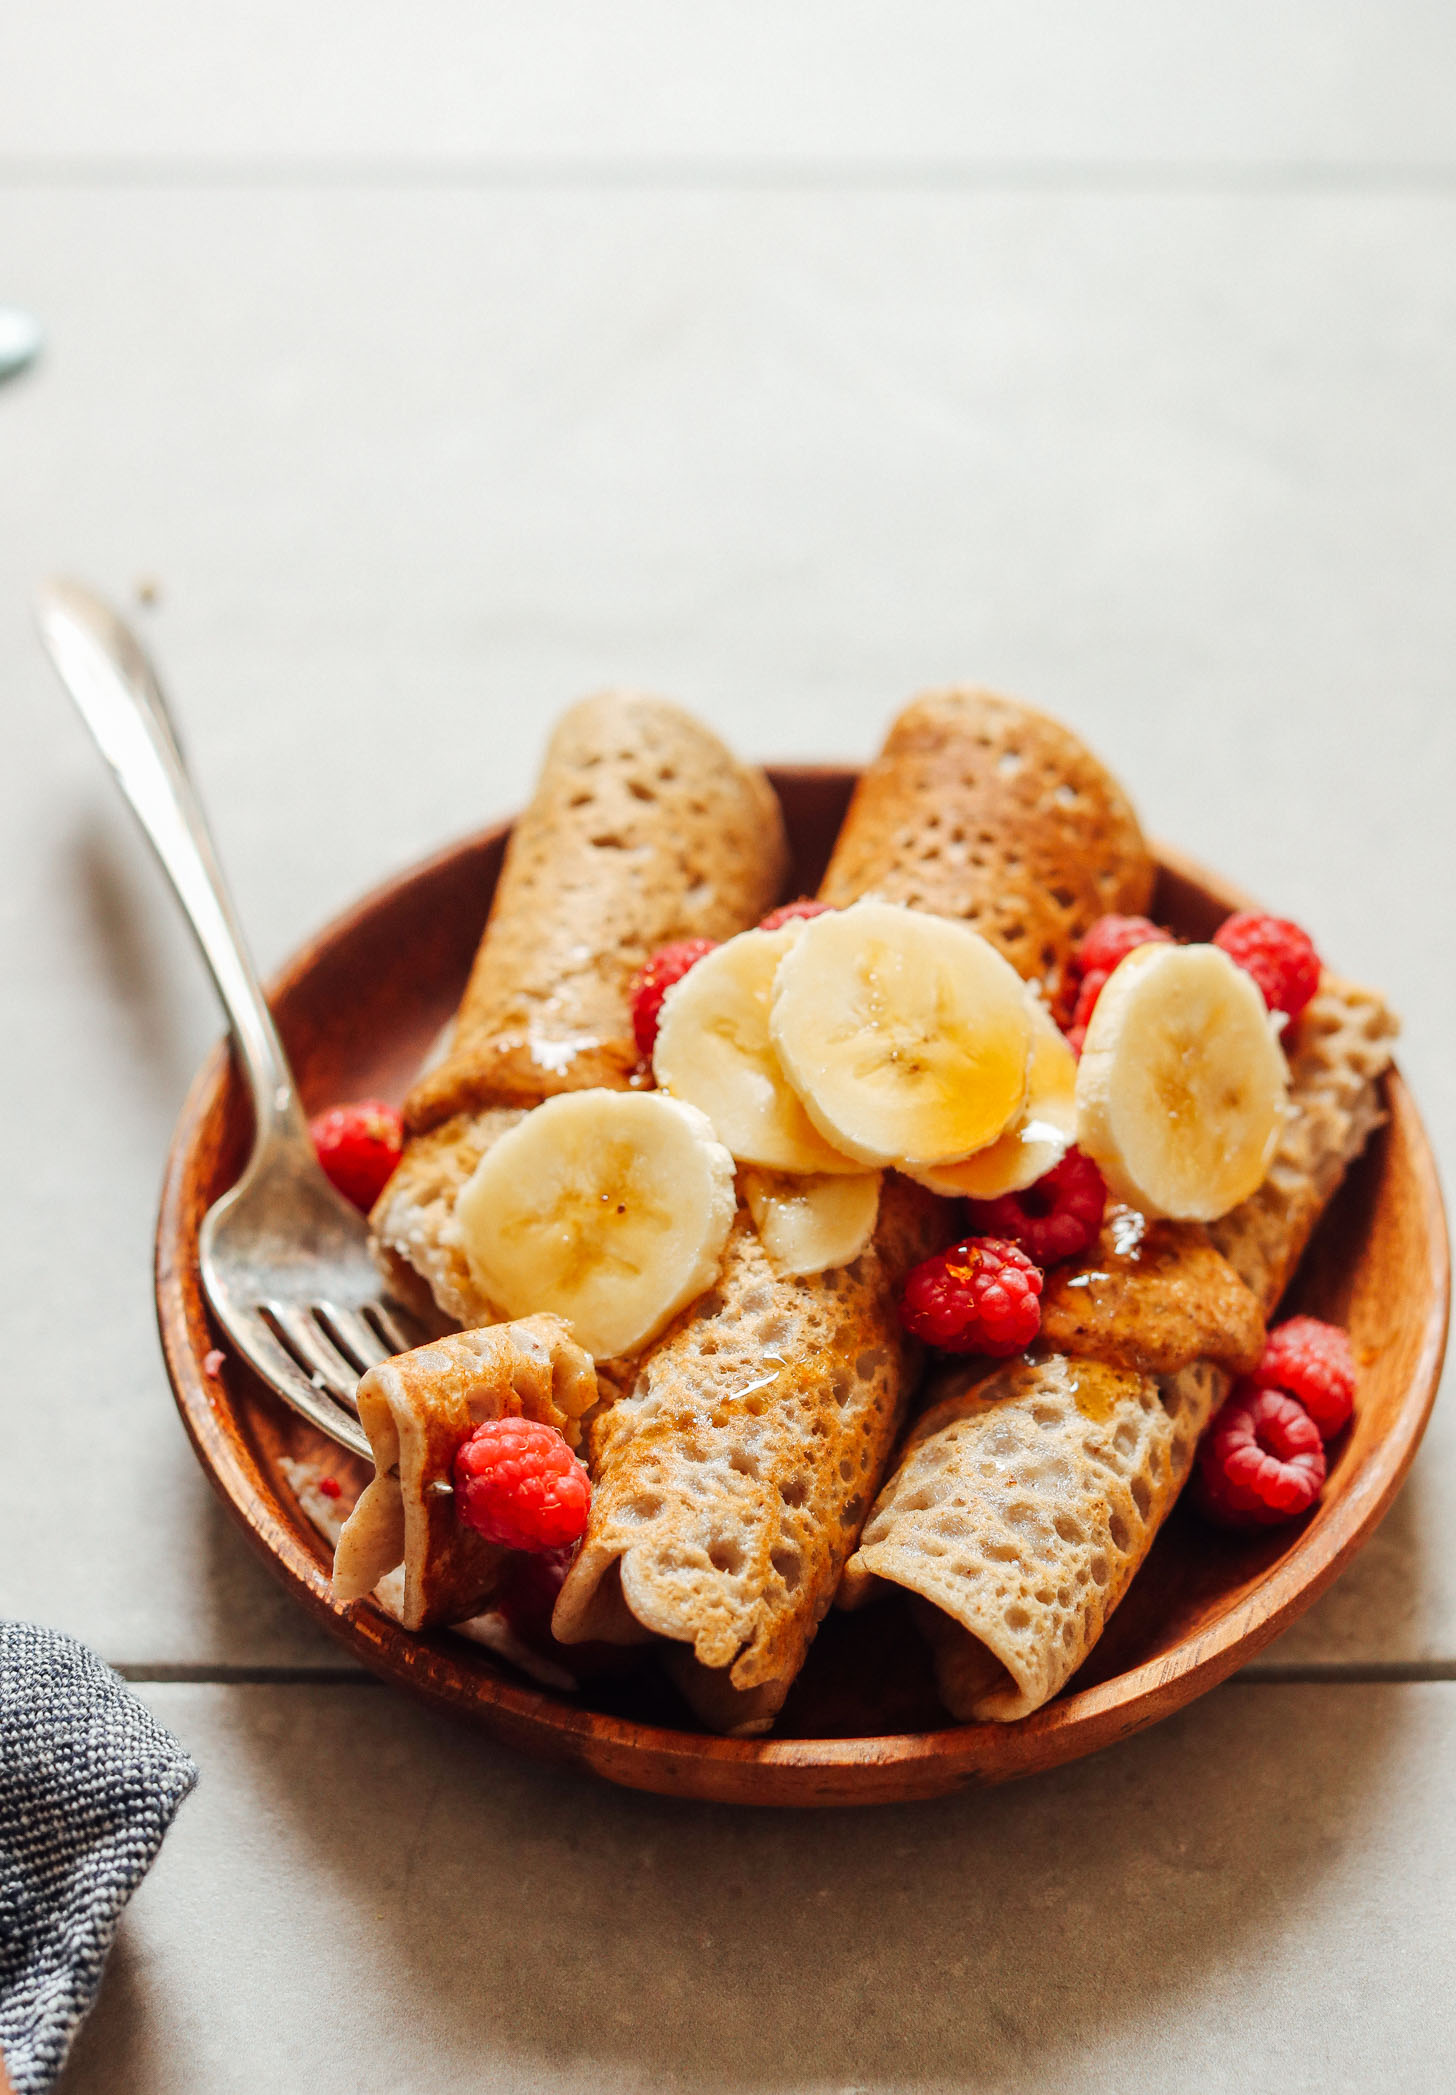 An eye level shot of buckwheat crepes on a wooden plate with bananas and raspberries